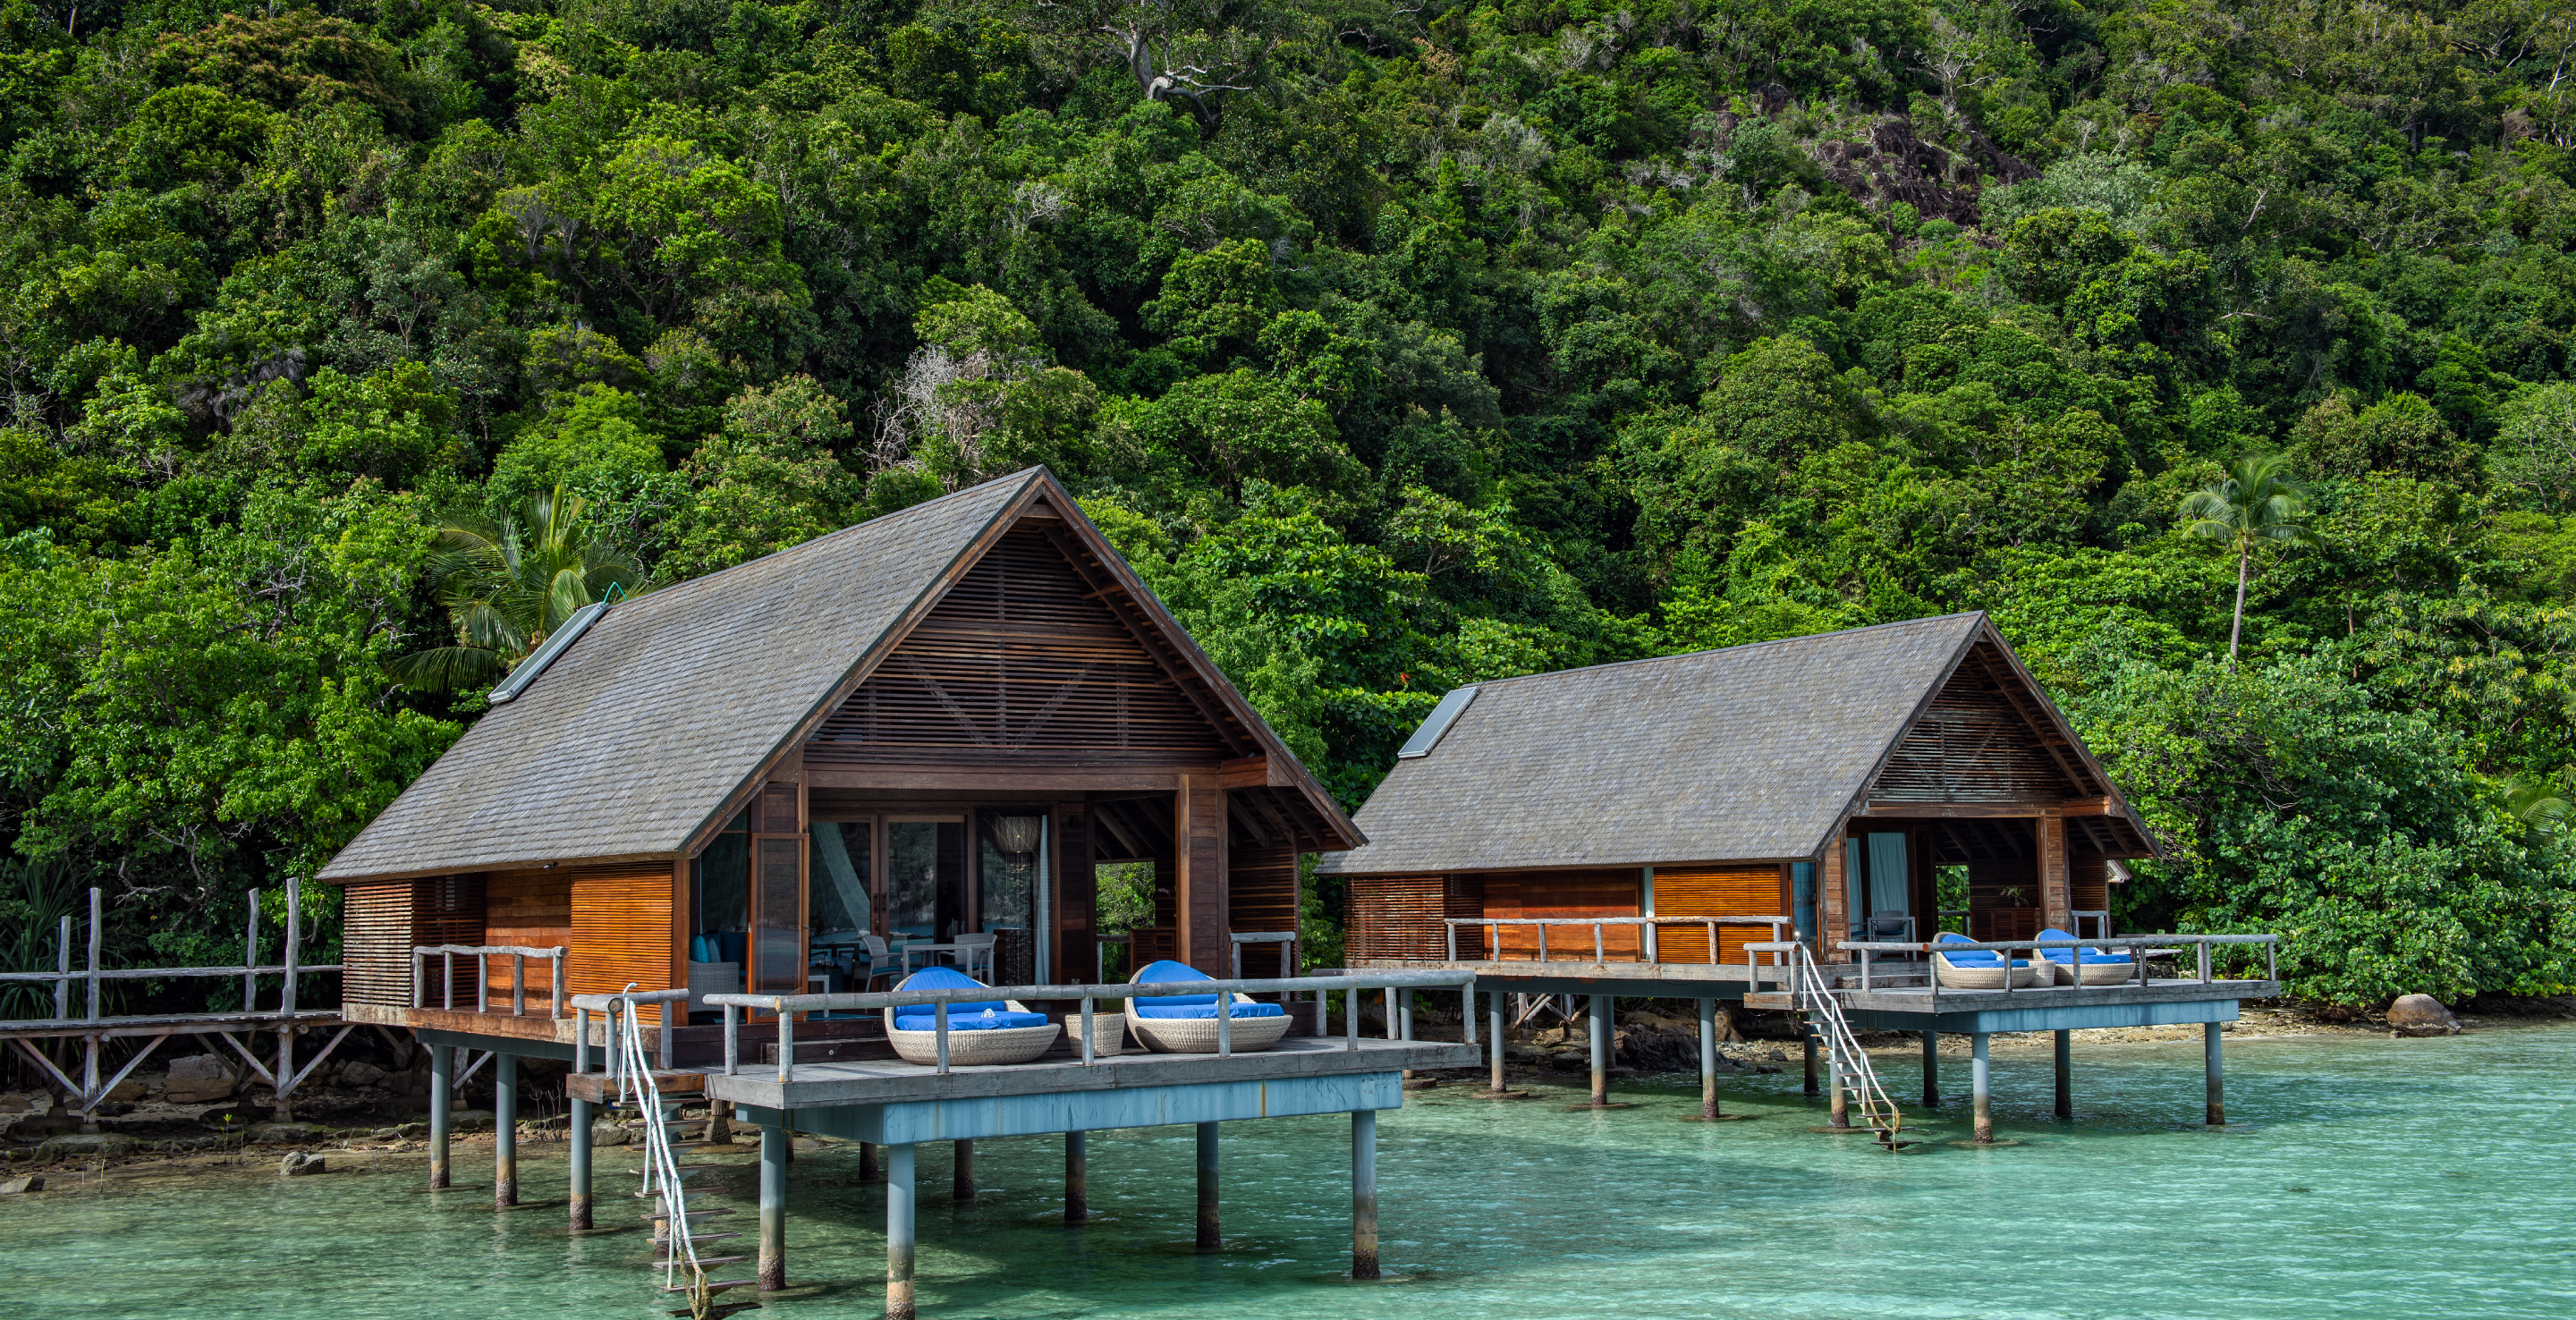 Best luxury overwater bungalow accommodation in Indonesia. 11 beautiful standalone overwater villas positioned over the crystal clear water.